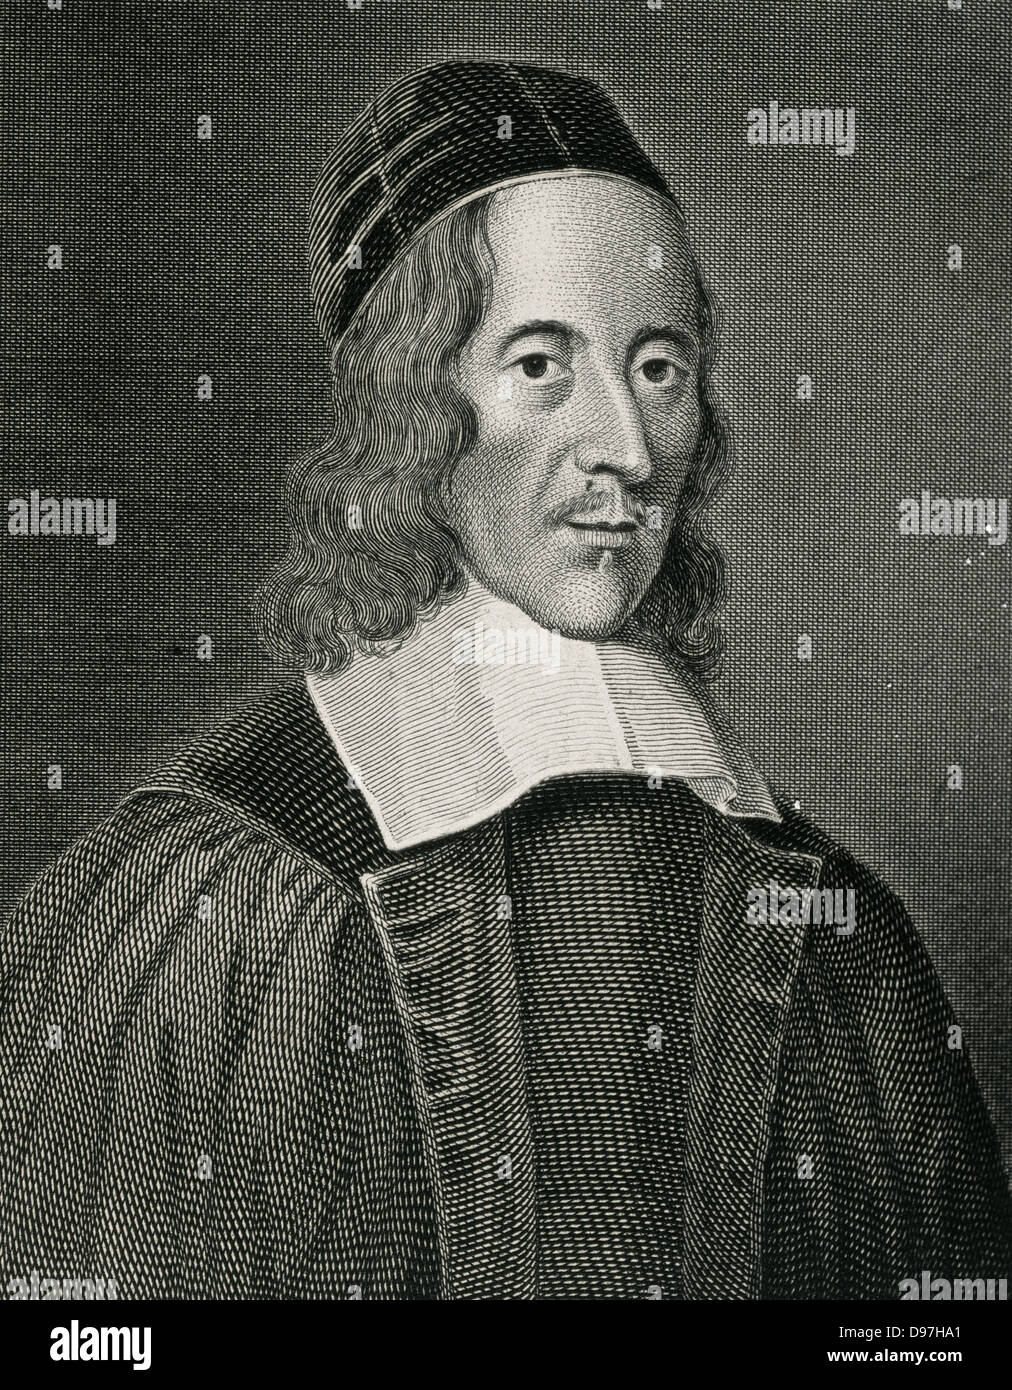 George Herbert ( 1593 – 1633). Welsh-born English poet, orator and Anglican priest. Engraving, 18th century. Stock Photo